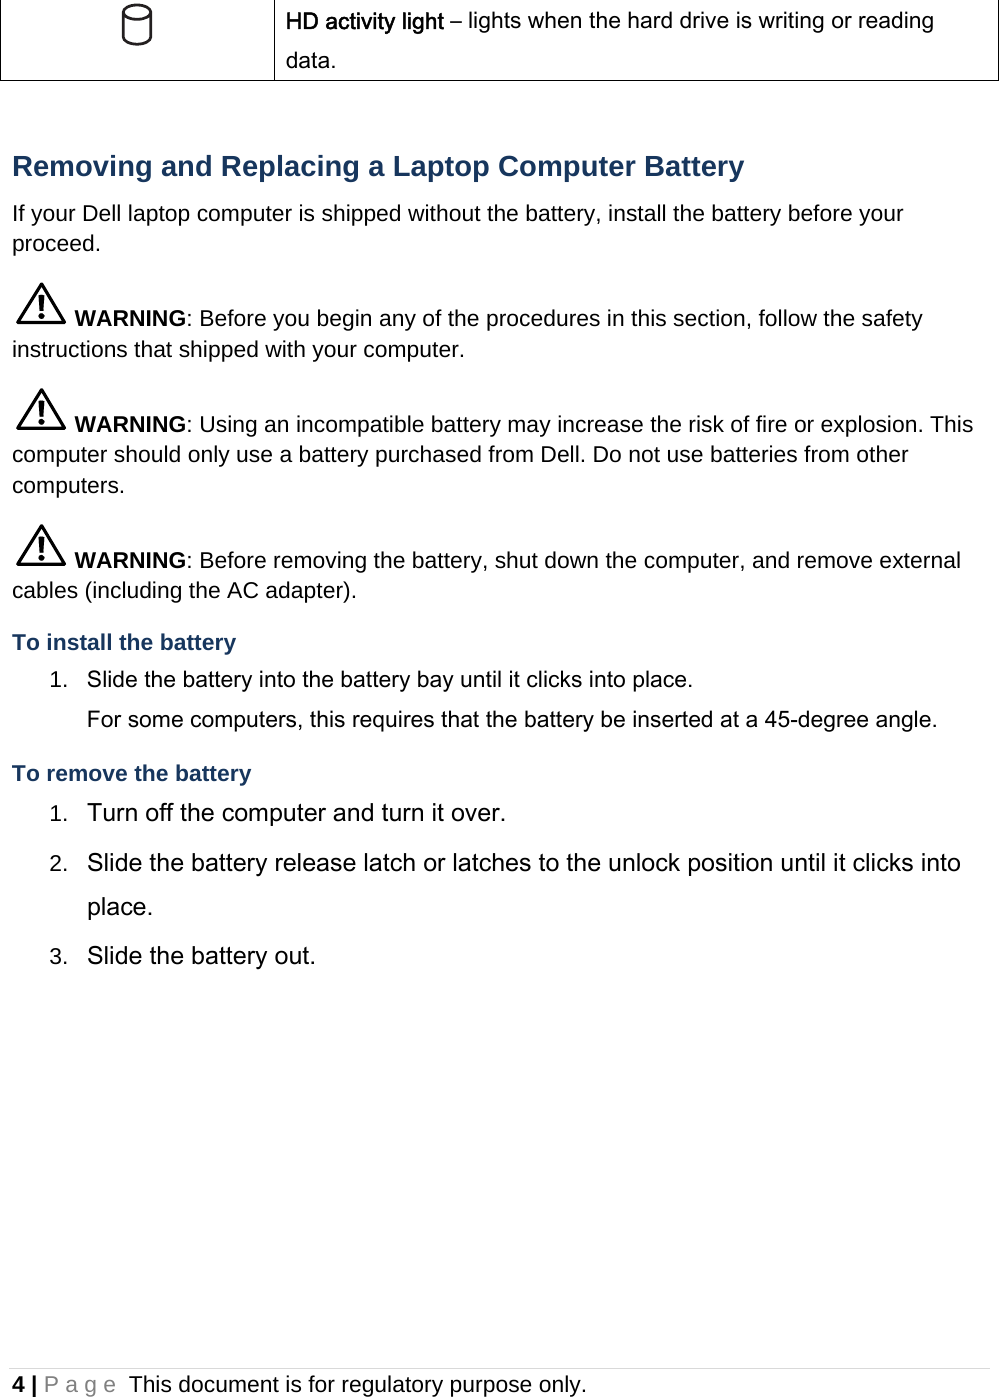 4 | Page This document is for regulatory purpose only.   HD activity light – lights when the hard drive is writing or reading data.  Removing and Replacing a Laptop Computer Battery If your Dell laptop computer is shipped without the battery, install the battery before your proceed.  WARNING: Before you begin any of the procedures in this section, follow the safety instructions that shipped with your computer.  WARNING: Using an incompatible battery may increase the risk of fire or explosion. This computer should only use a battery purchased from Dell. Do not use batteries from other computers.  WARNING: Before removing the battery, shut down the computer, and remove external cables (including the AC adapter). To install the battery 1.  Slide the battery into the battery bay until it clicks into place.  For some computers, this requires that the battery be inserted at a 45-degree angle. To remove the battery 1.  Turn off the computer and turn it over. 2.  Slide the battery release latch or latches to the unlock position until it clicks into place. 3.  Slide the battery out.    